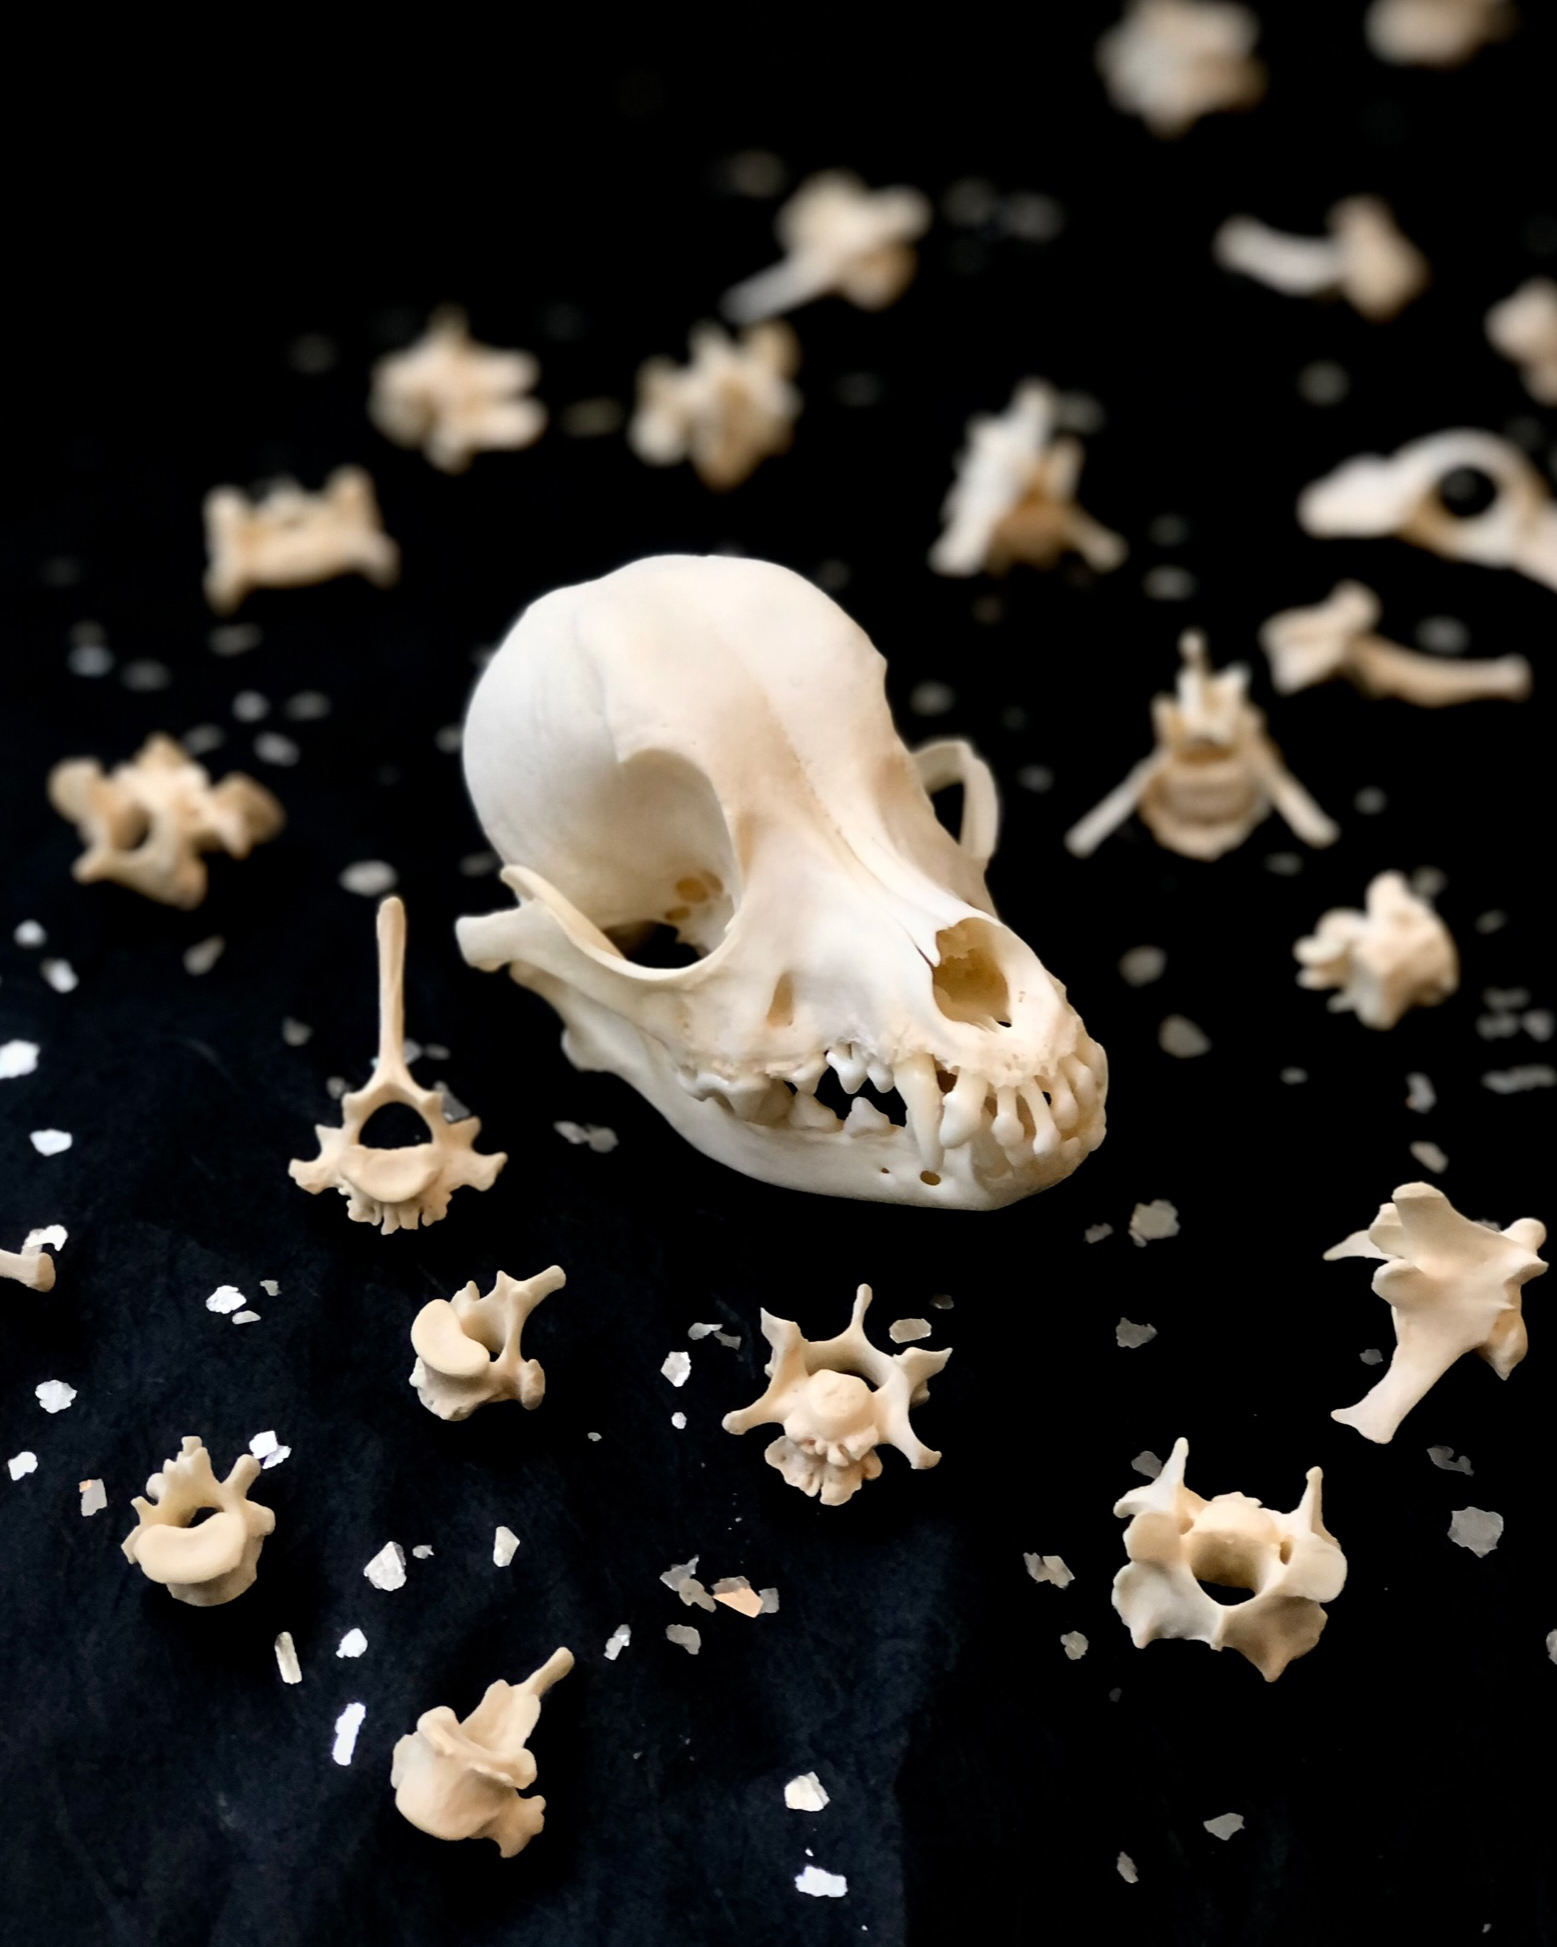 Small dog's skull with smaller vertebrae and salt flakes surrounding it